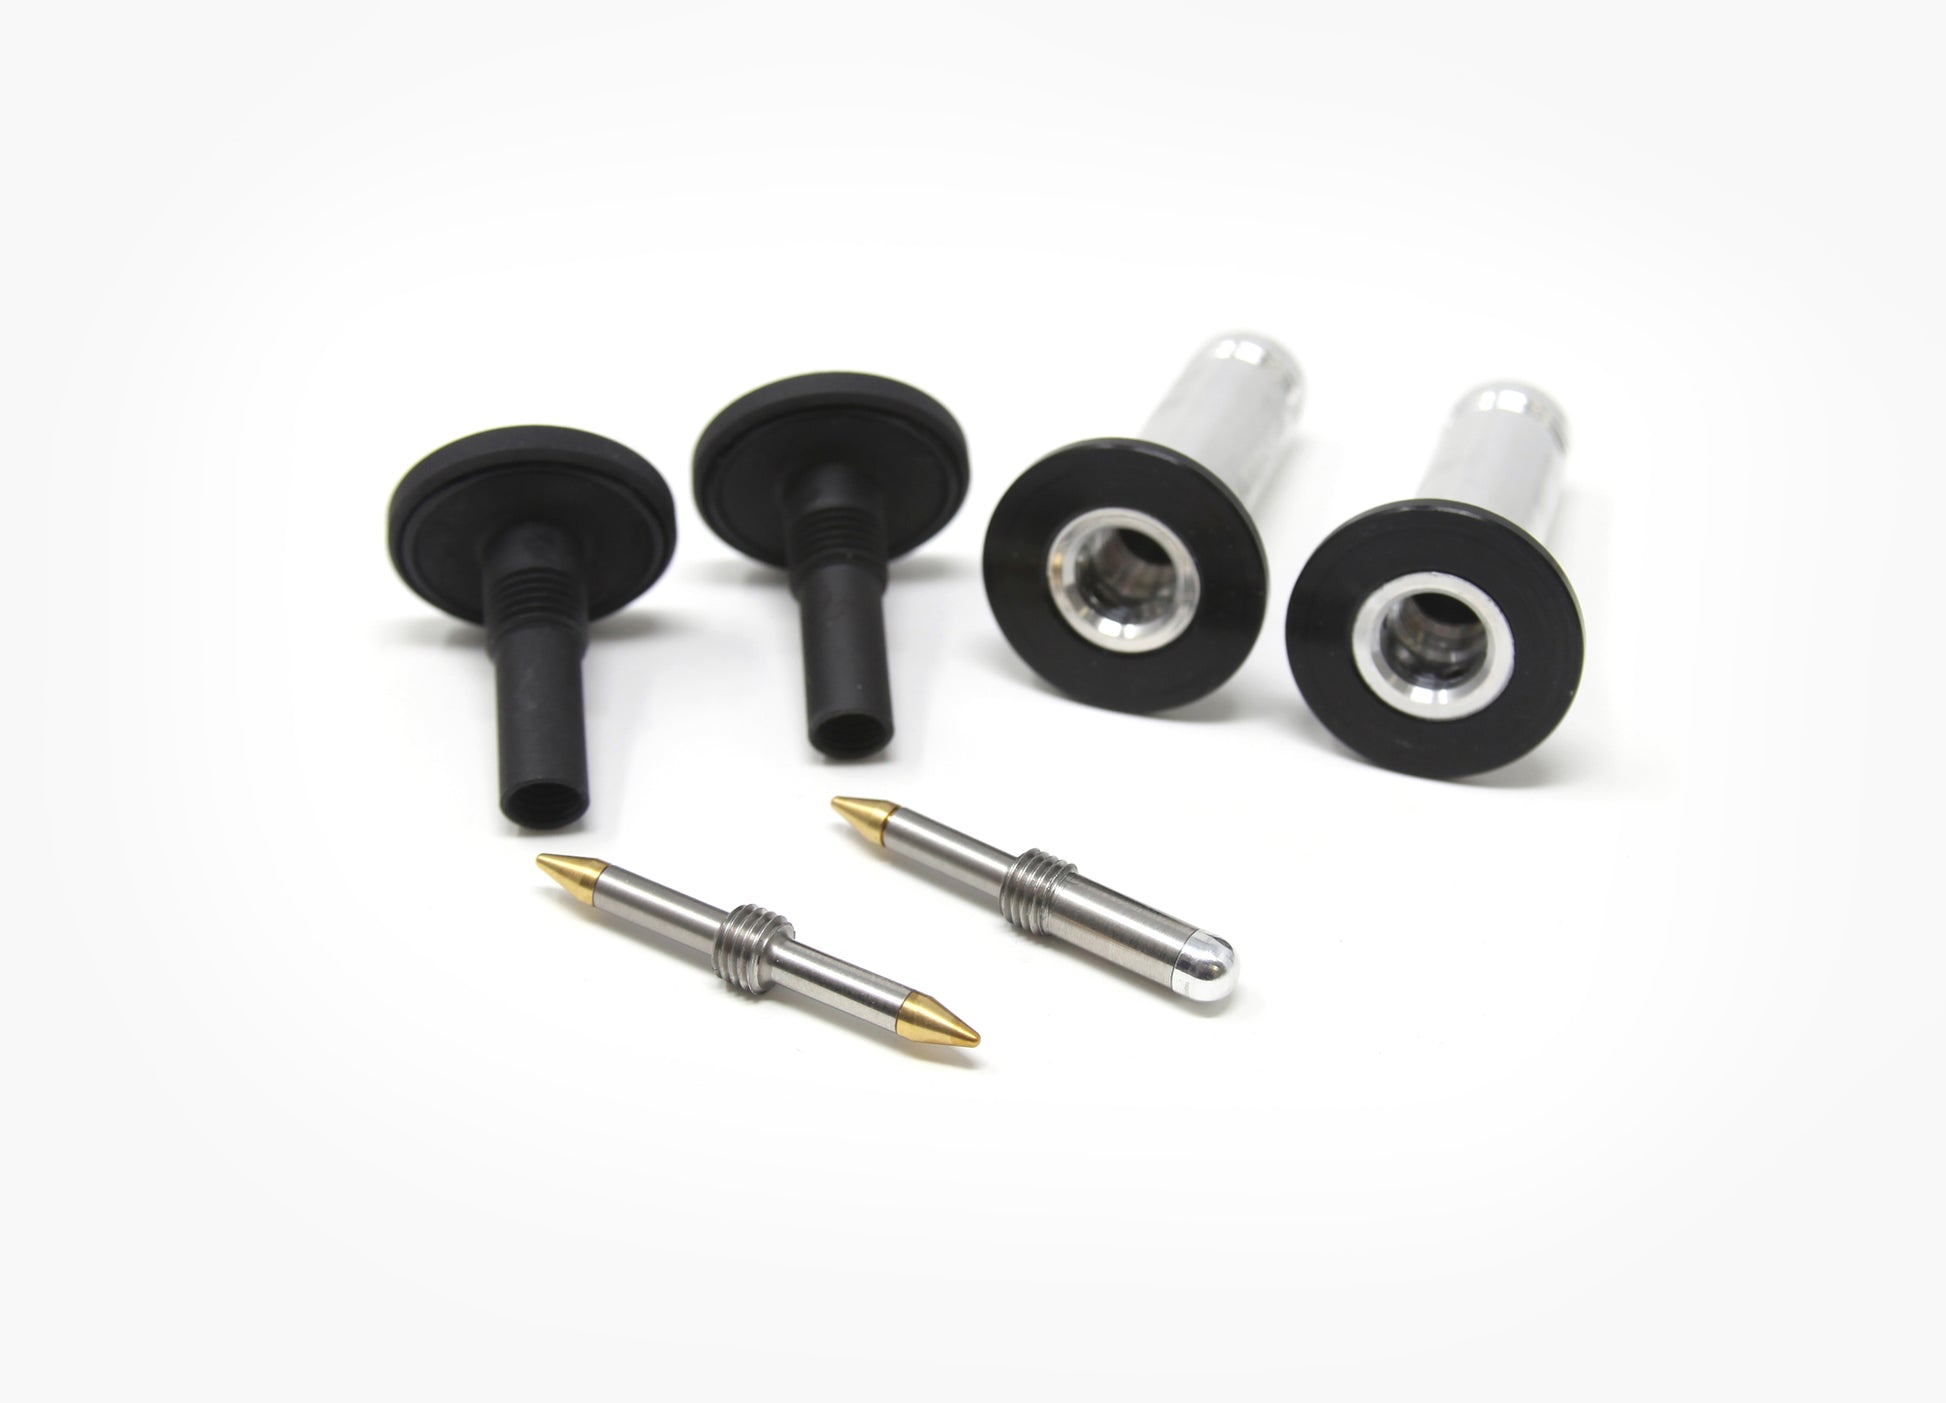 Dynaplug Replacement Repair Plugs Variety Pack – Mike's Bikes